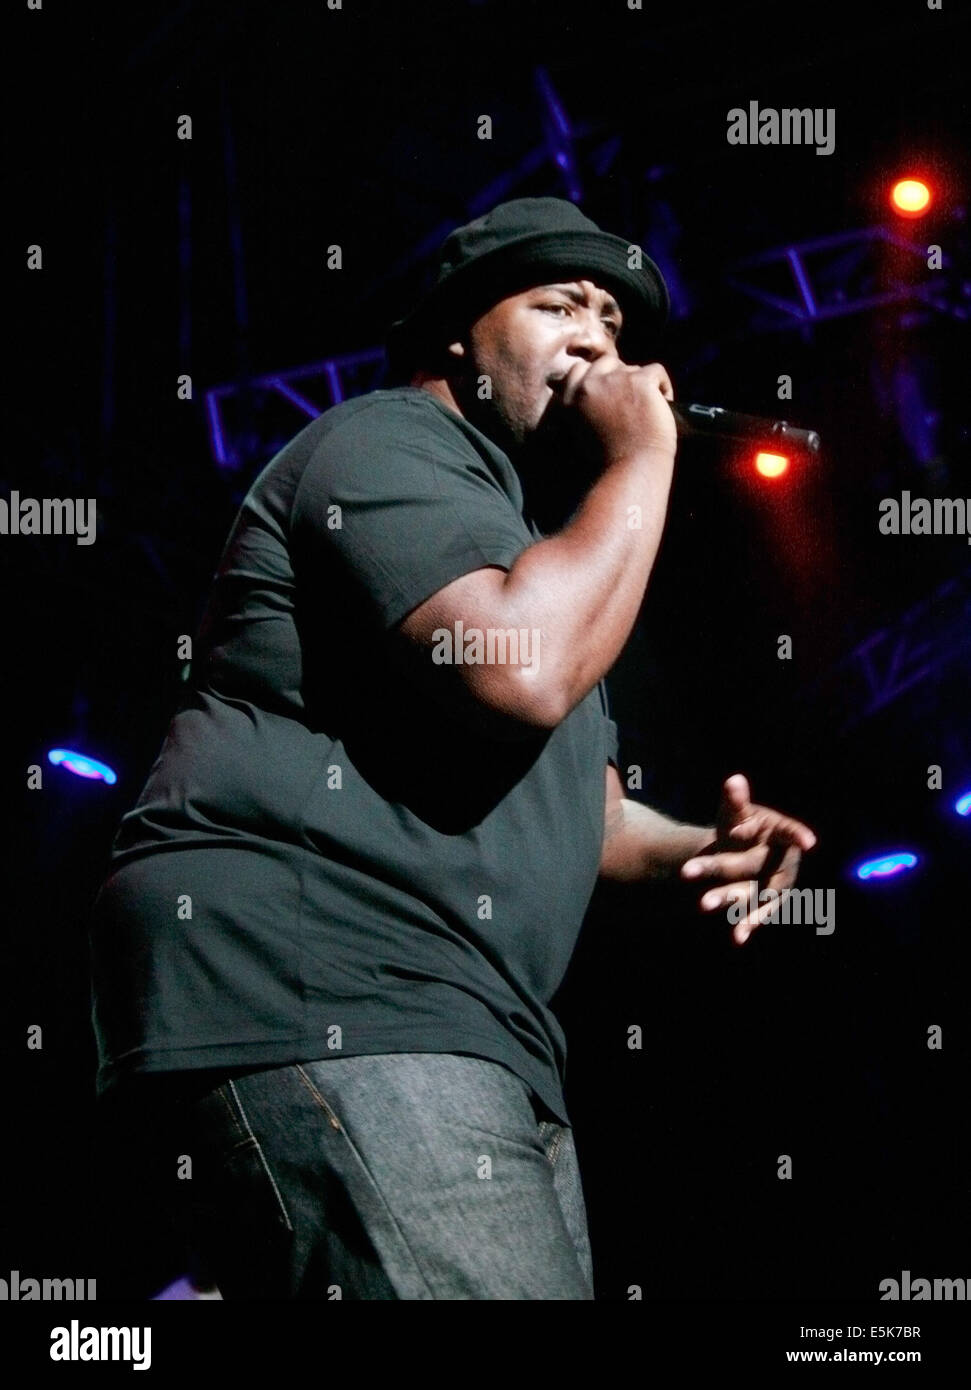 Las Vegas, Nevada, USA. 2nd Aug, 2014. Rapper EMD from the group EPMD performs during the ''Legends Of Hip Hop Concert'' at The Joint on August 2, 2014' inside the Hard Rock Hotel & Casino in Las Vegas Nevada Credit:  Marcel Thomas/ZUMA Wire/Alamy Live News Stock Photo